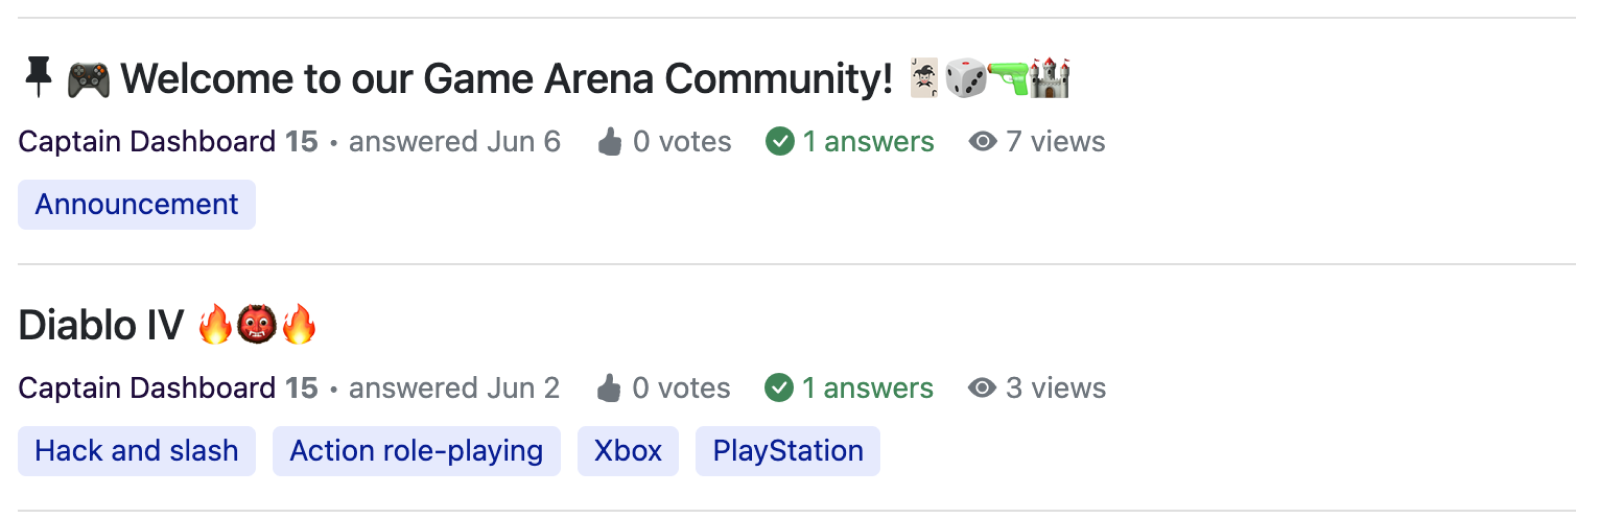 Game Community Built with Answer